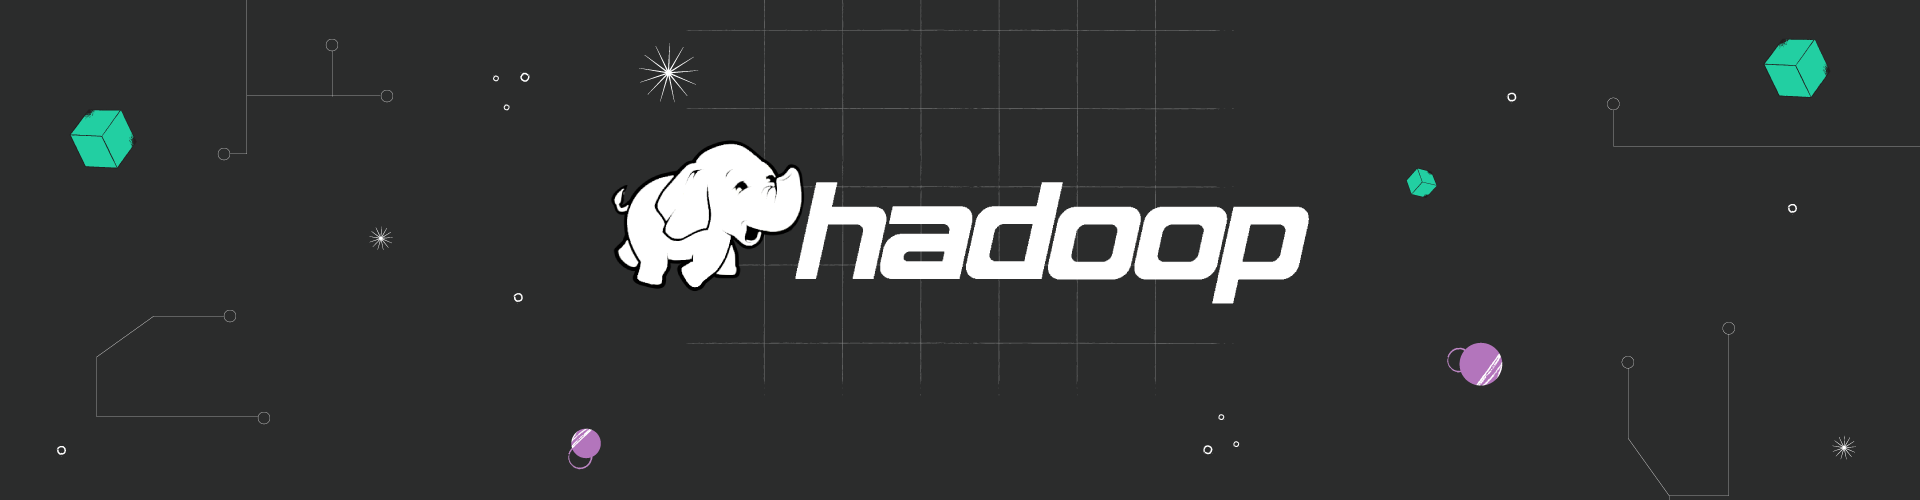 Apache Hadoop and Hadoop Distributed File System (HDFS) - Architecture, Use Cases, and Benefits